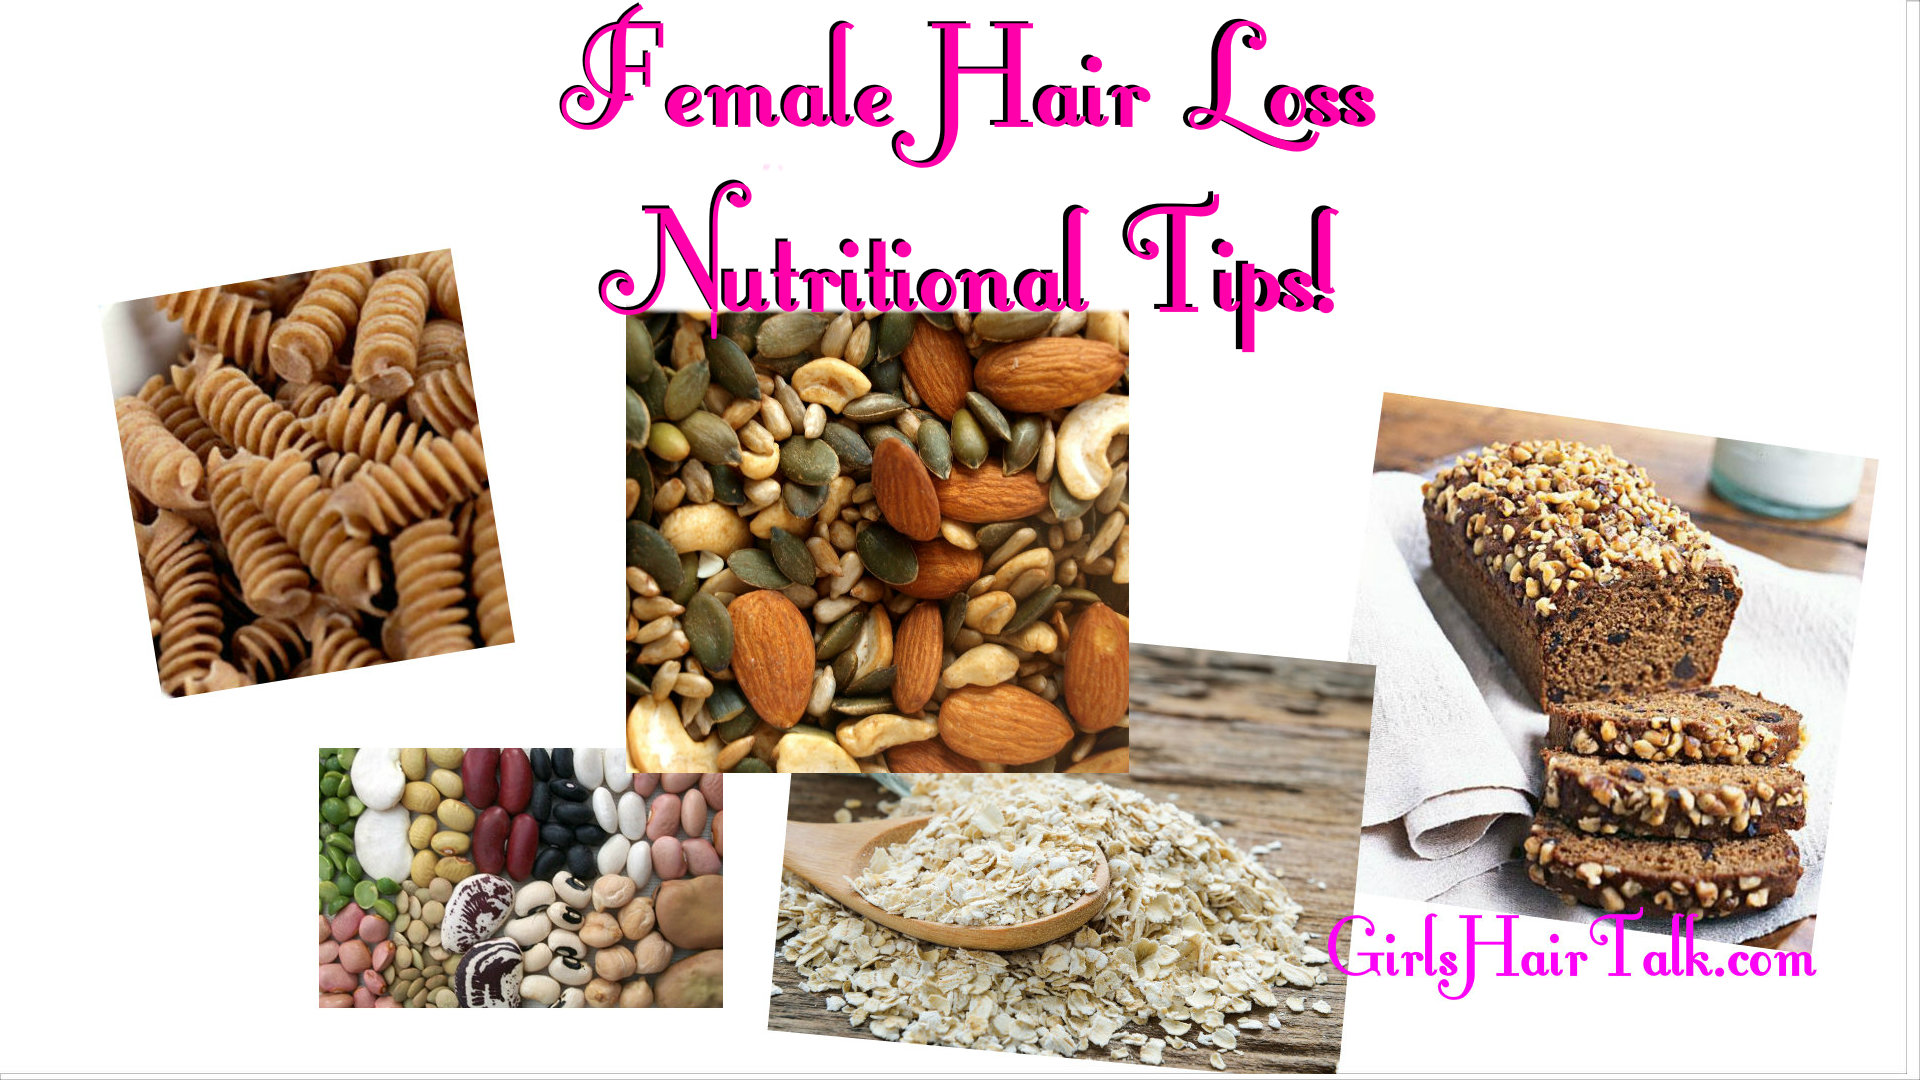 Nutrition pictures that help hair growth such as brown rice, 100% whole wheat pasta and wheat bread.